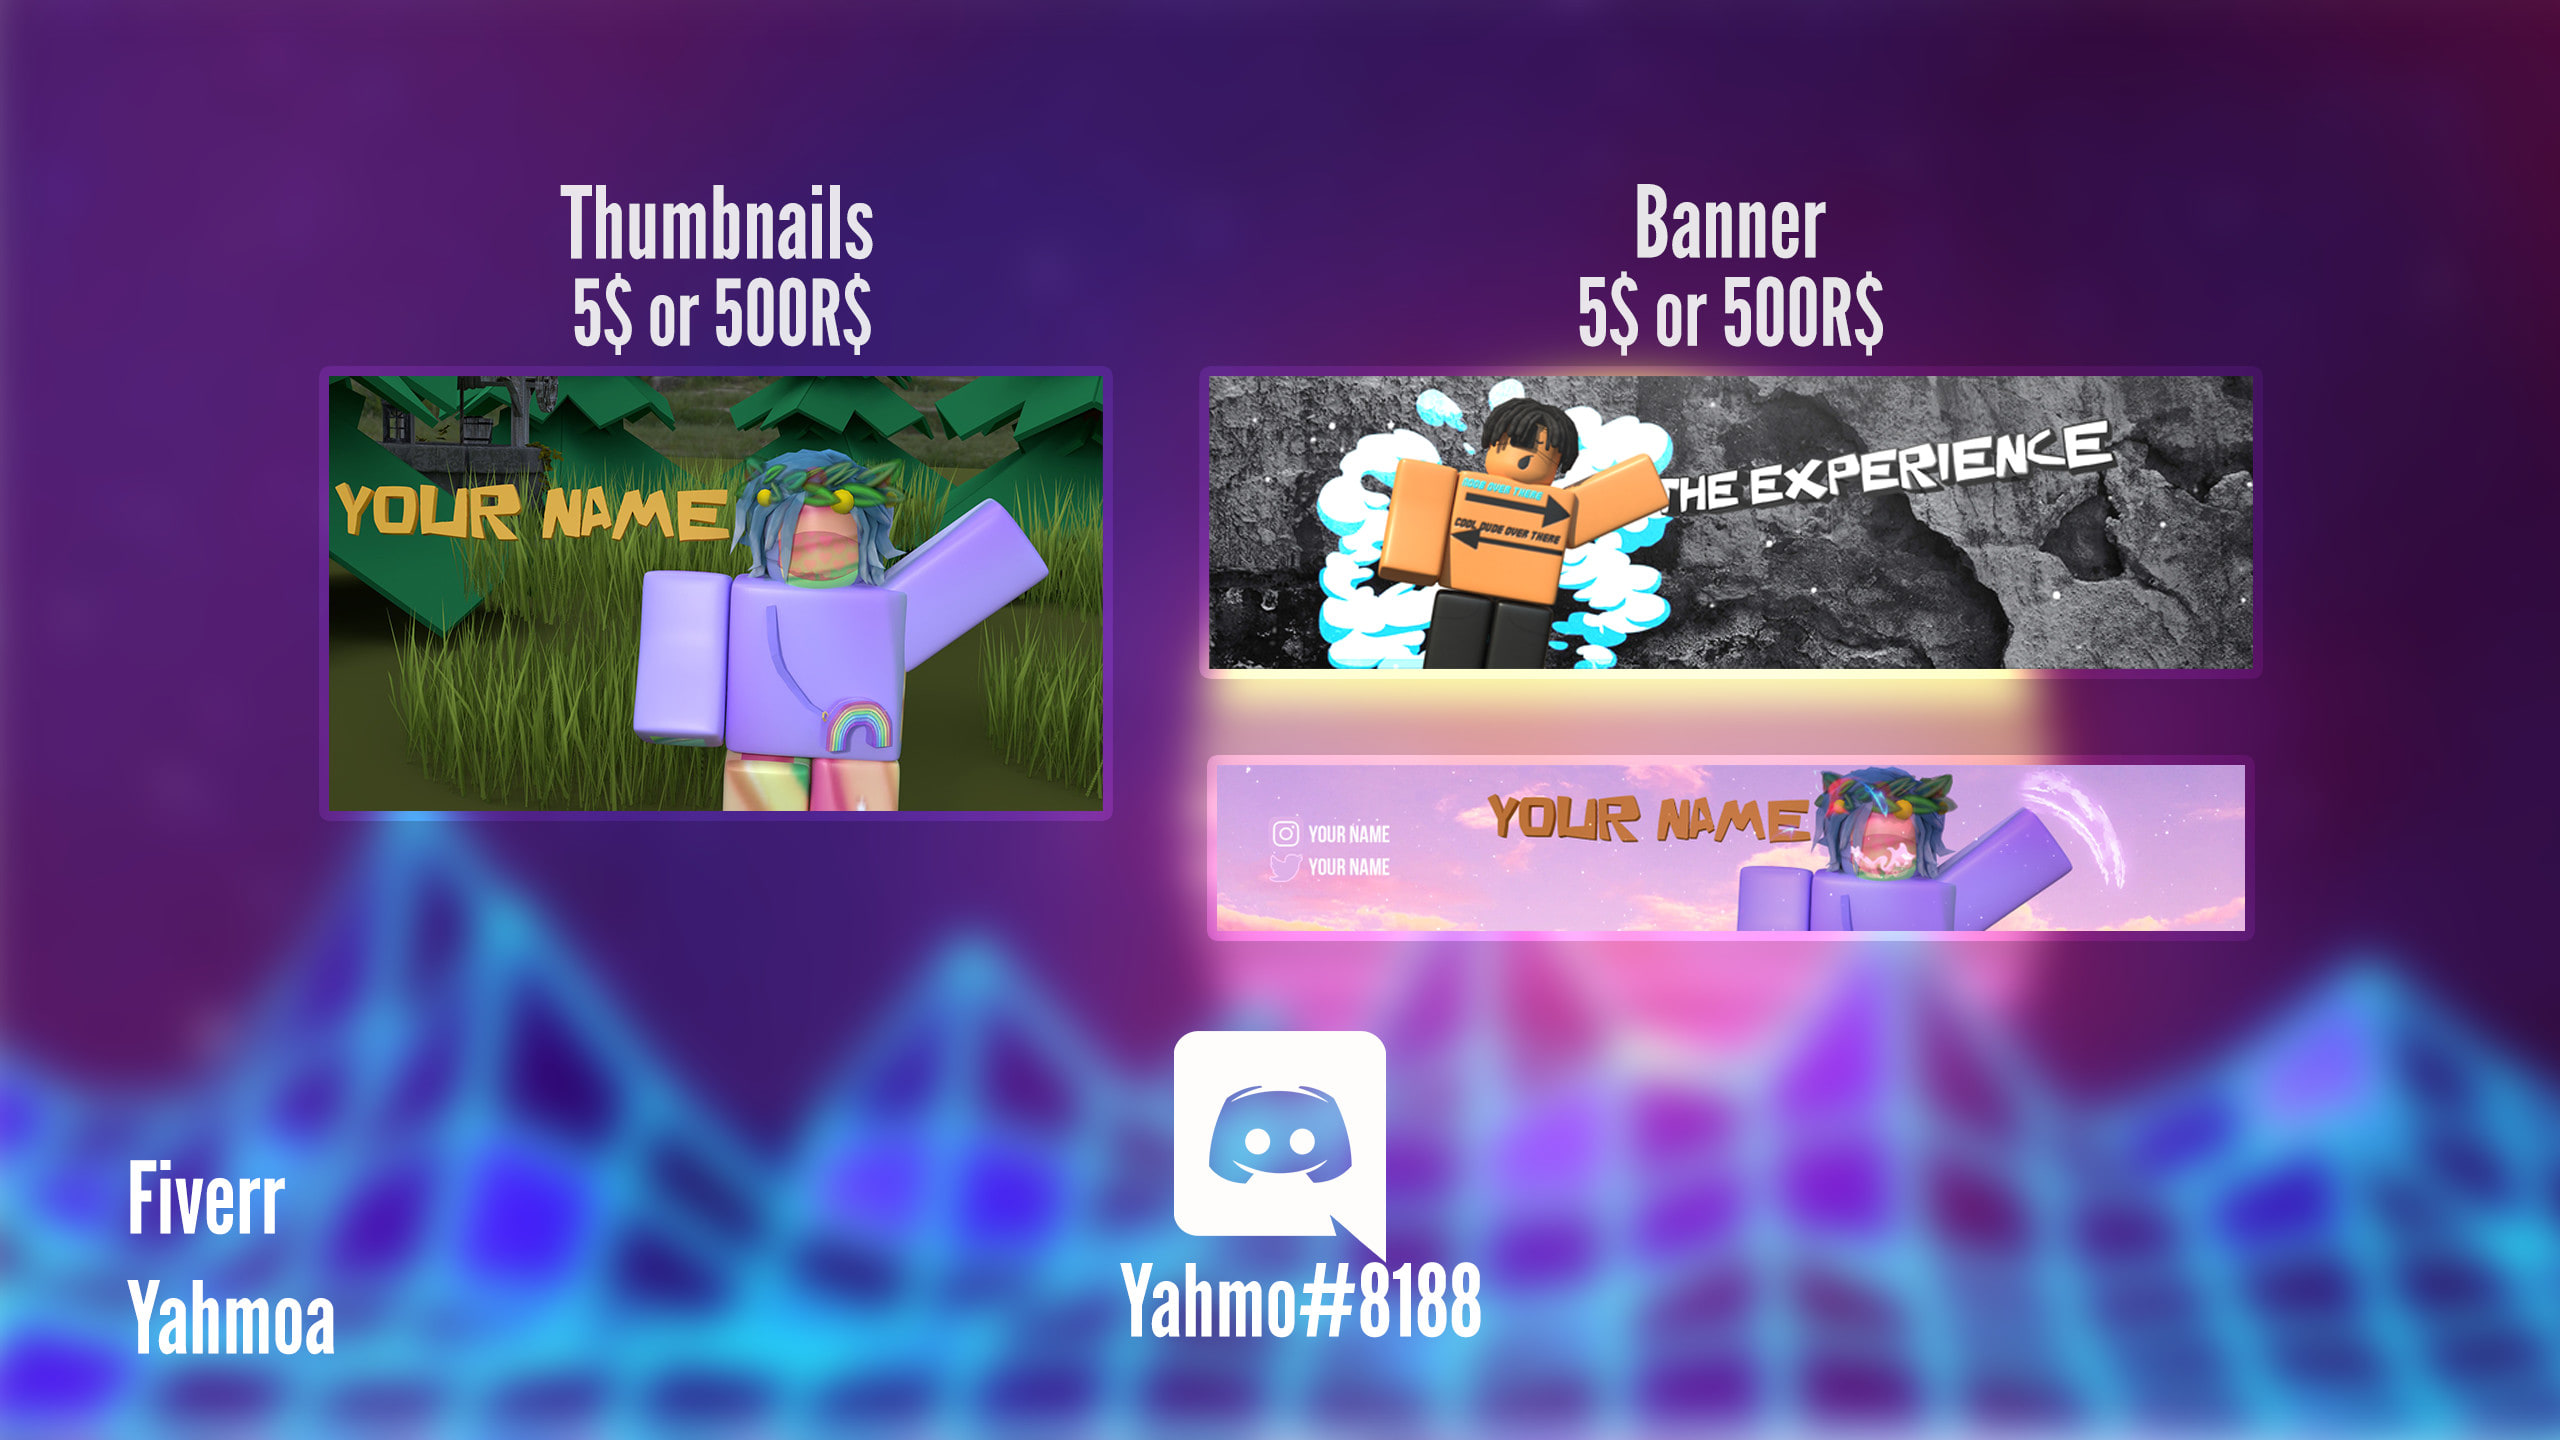 Do A Roblox Banner Or A Thumbnail For You Gfx By Yahmoa - make you a roblox thumbnail logo banner 3d or whatever you want